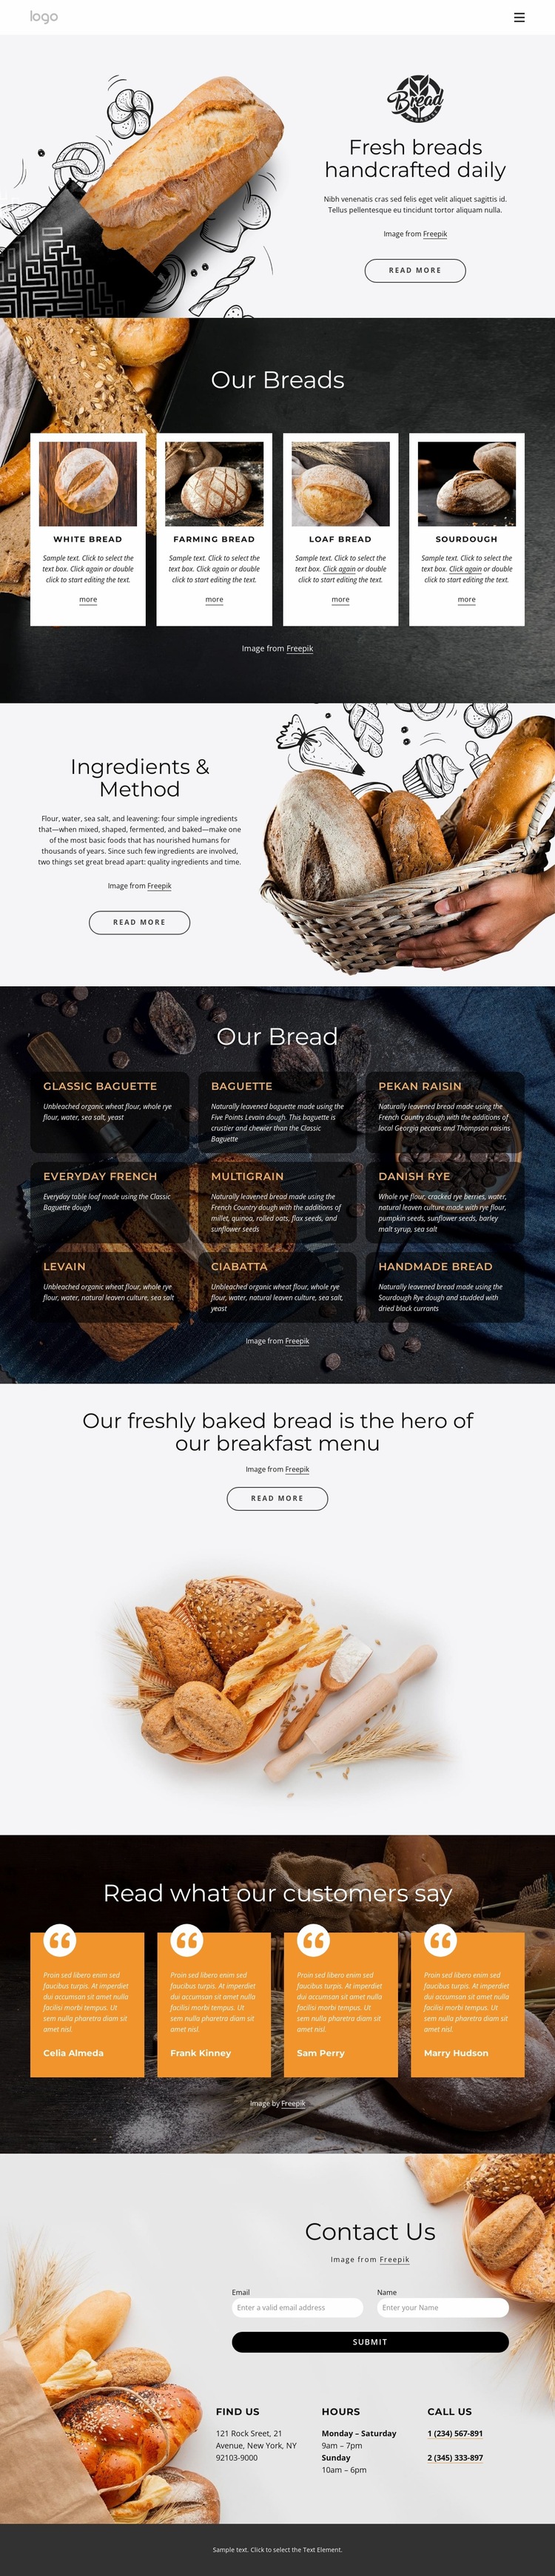 Fresh bread handcrafted every day Website Builder Templates